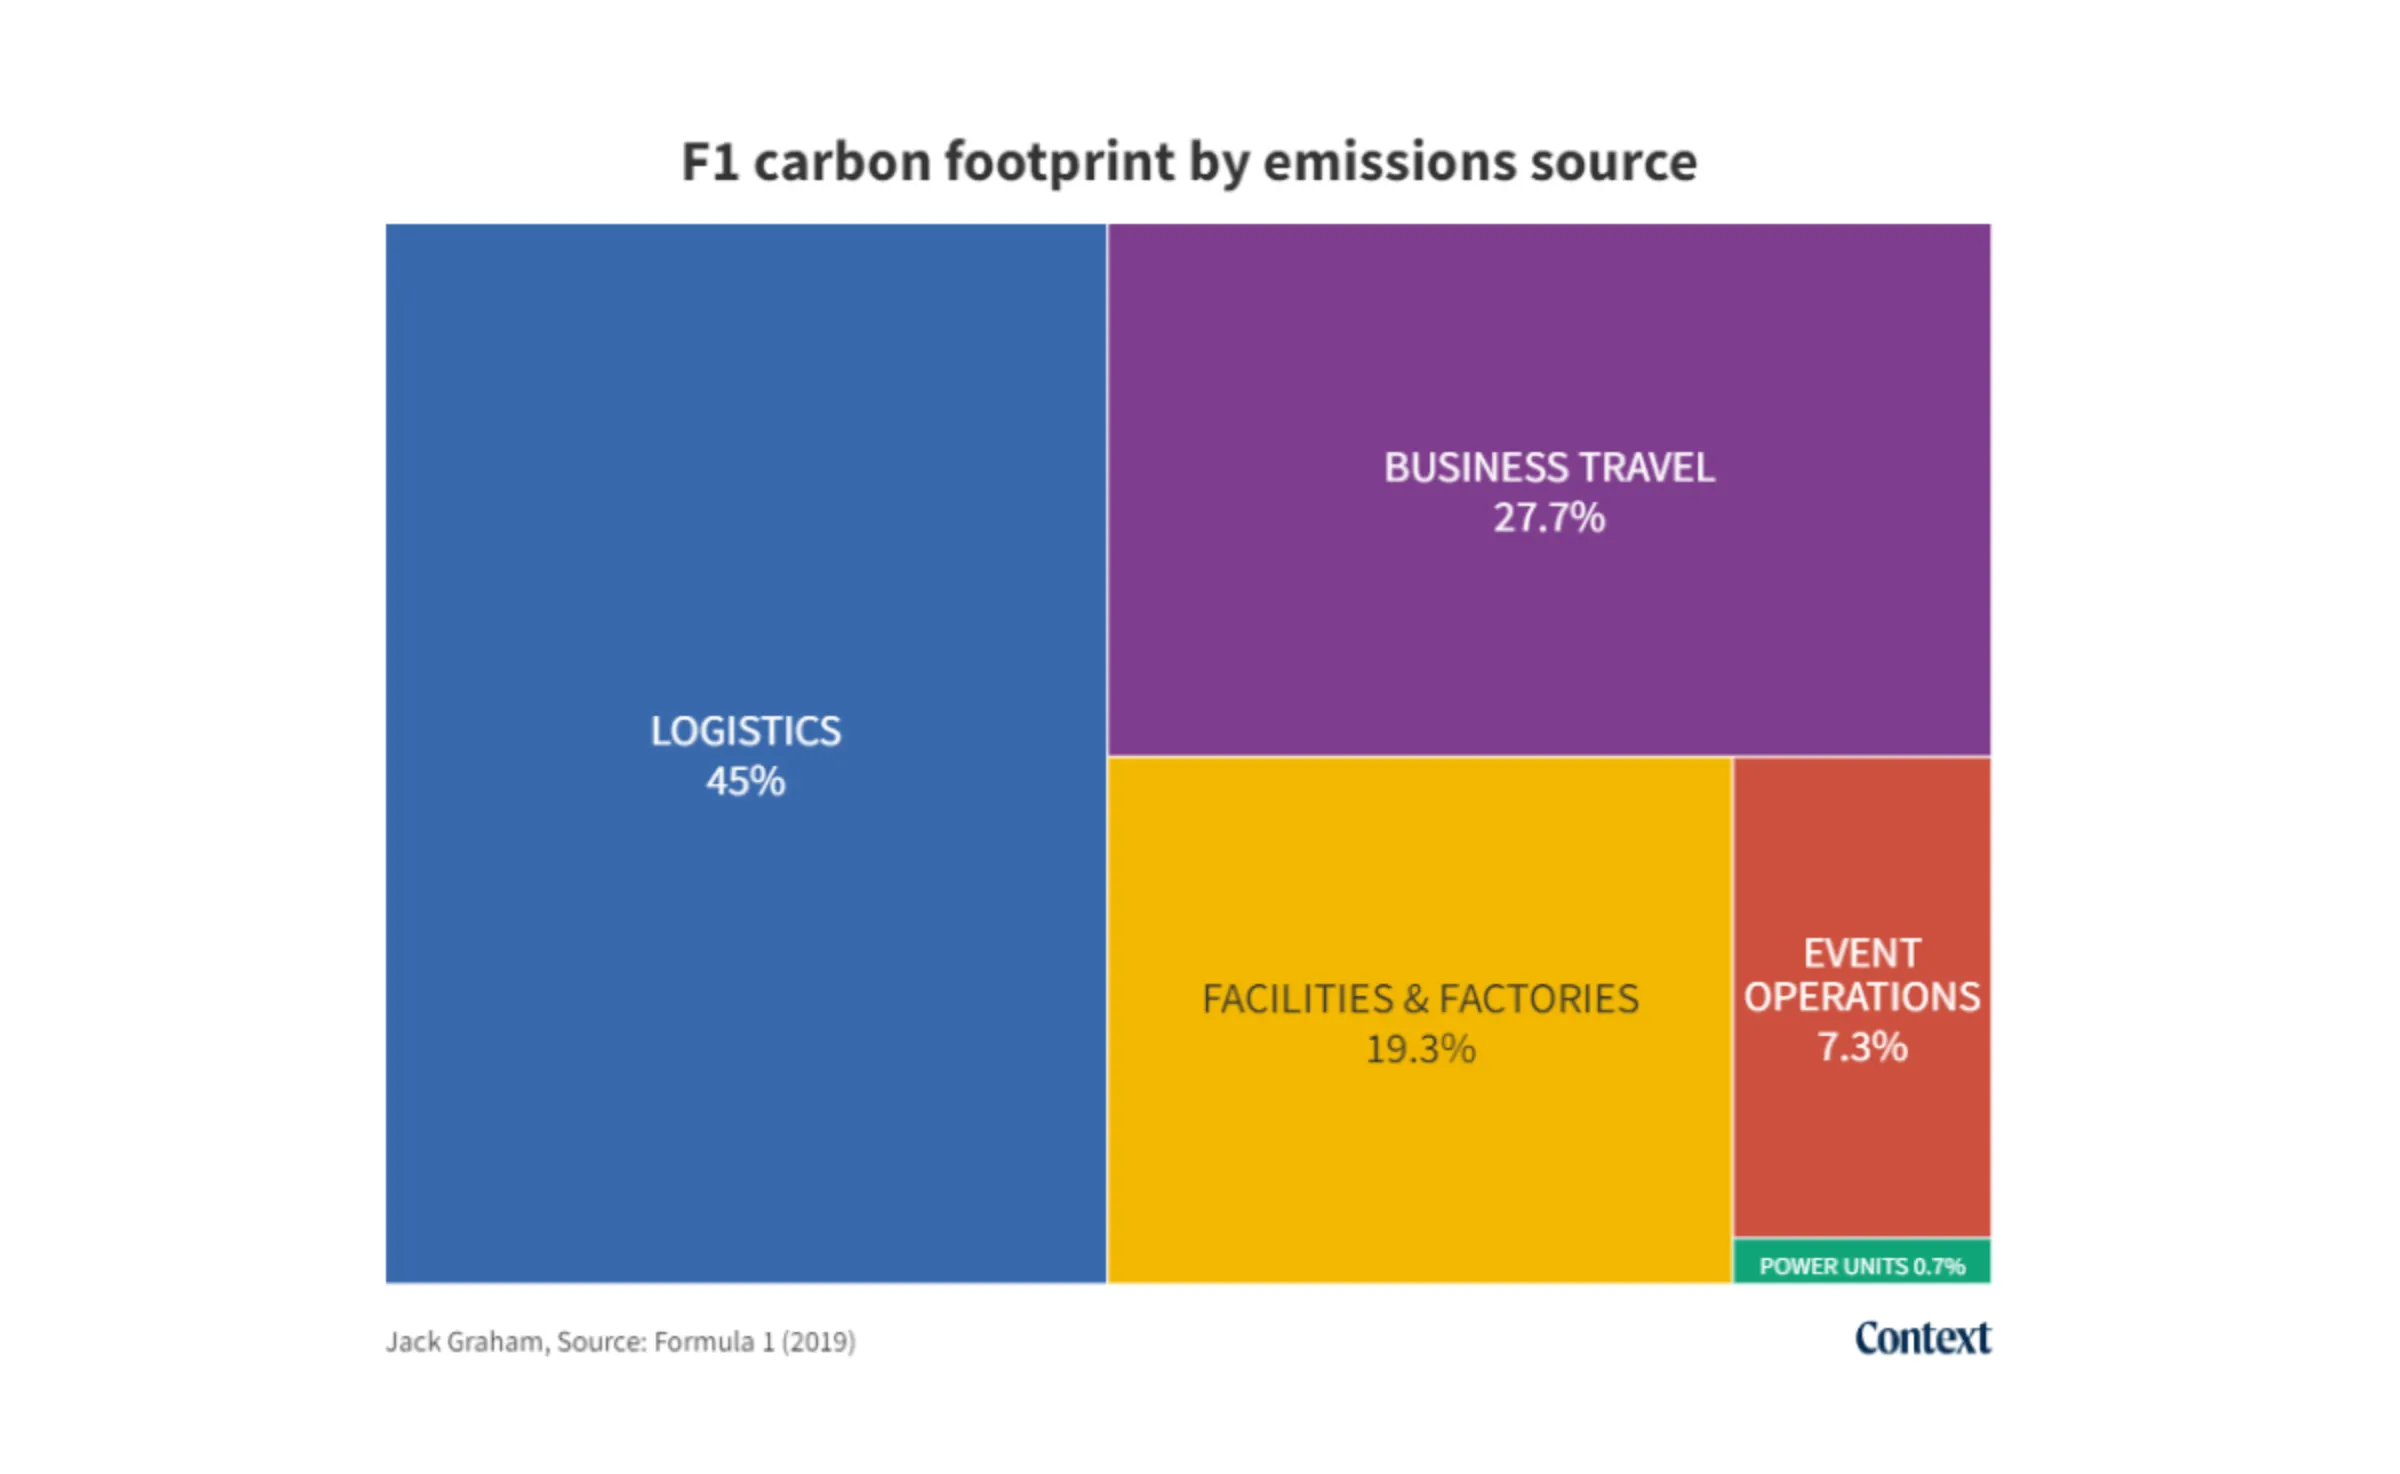 map - F1 Carbon footprint emissions by source